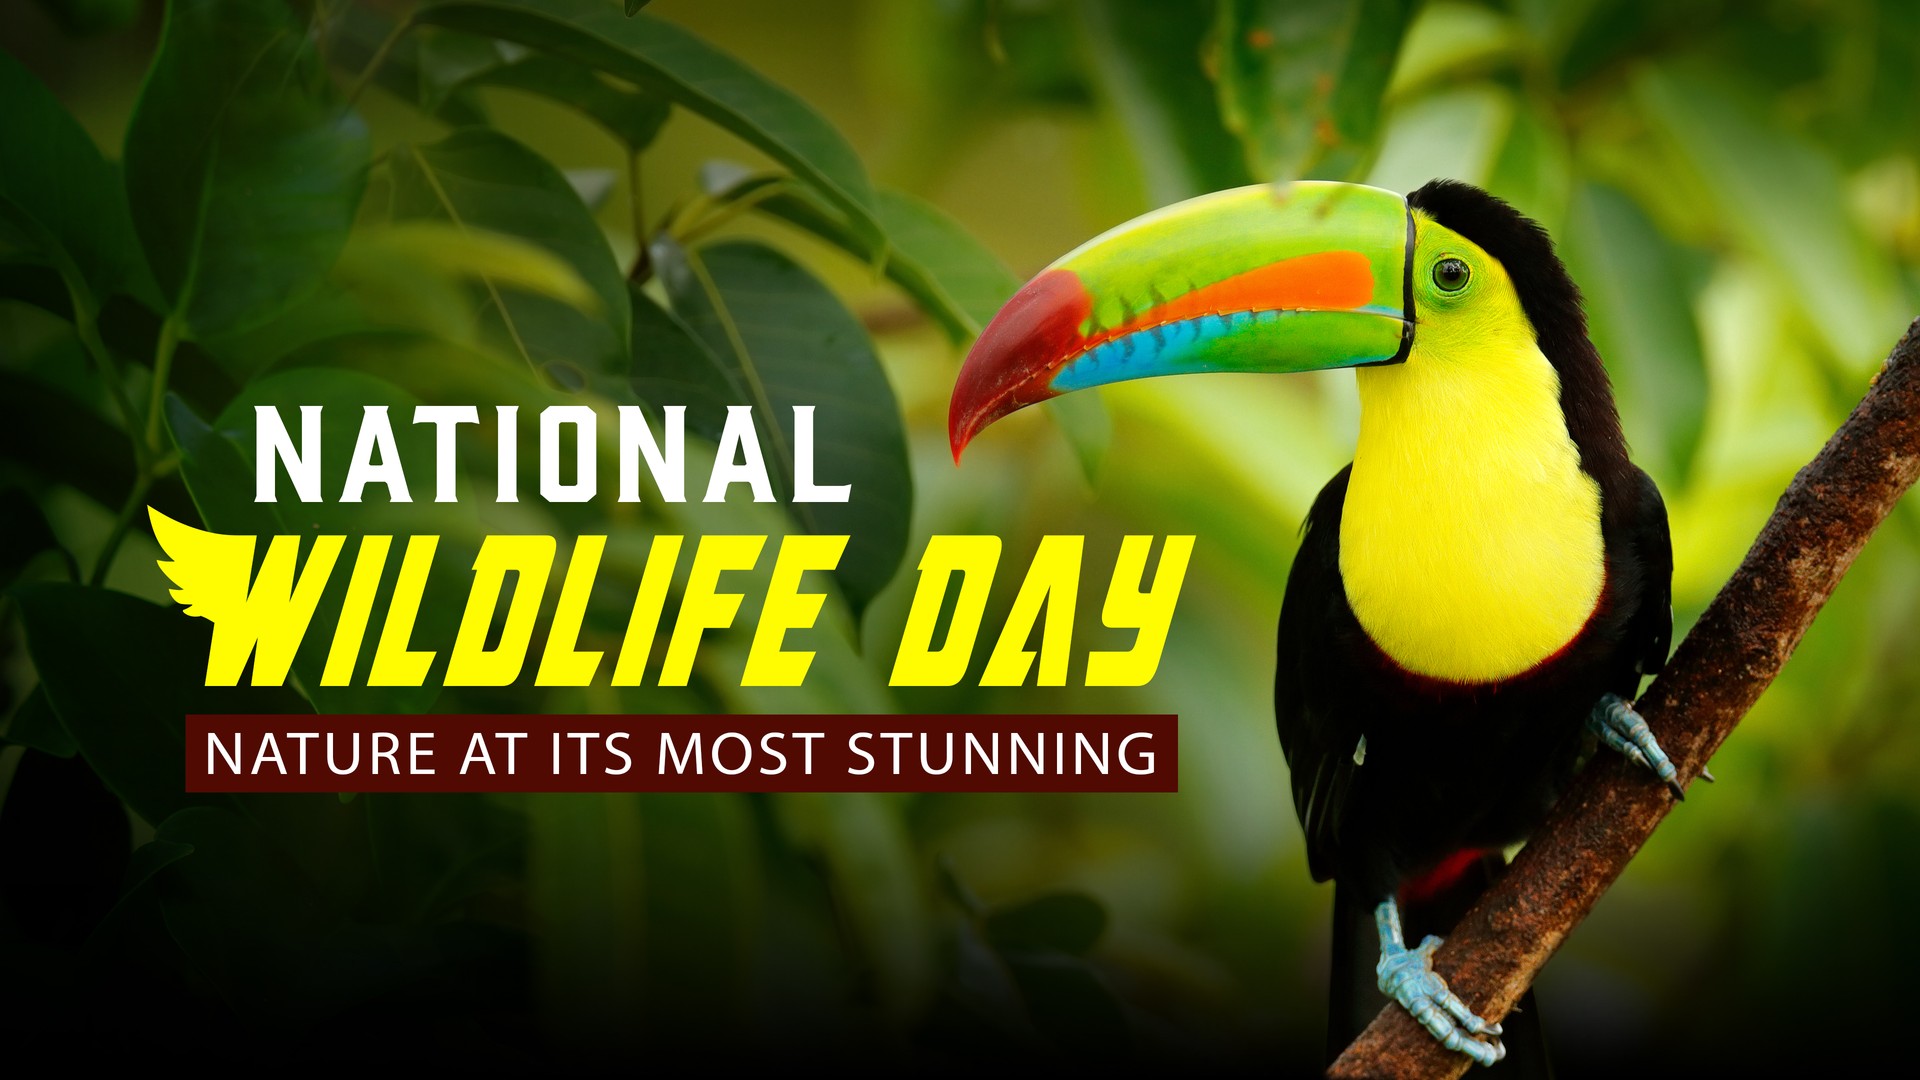 National Wildlife Day: Nature at its Most Stunning